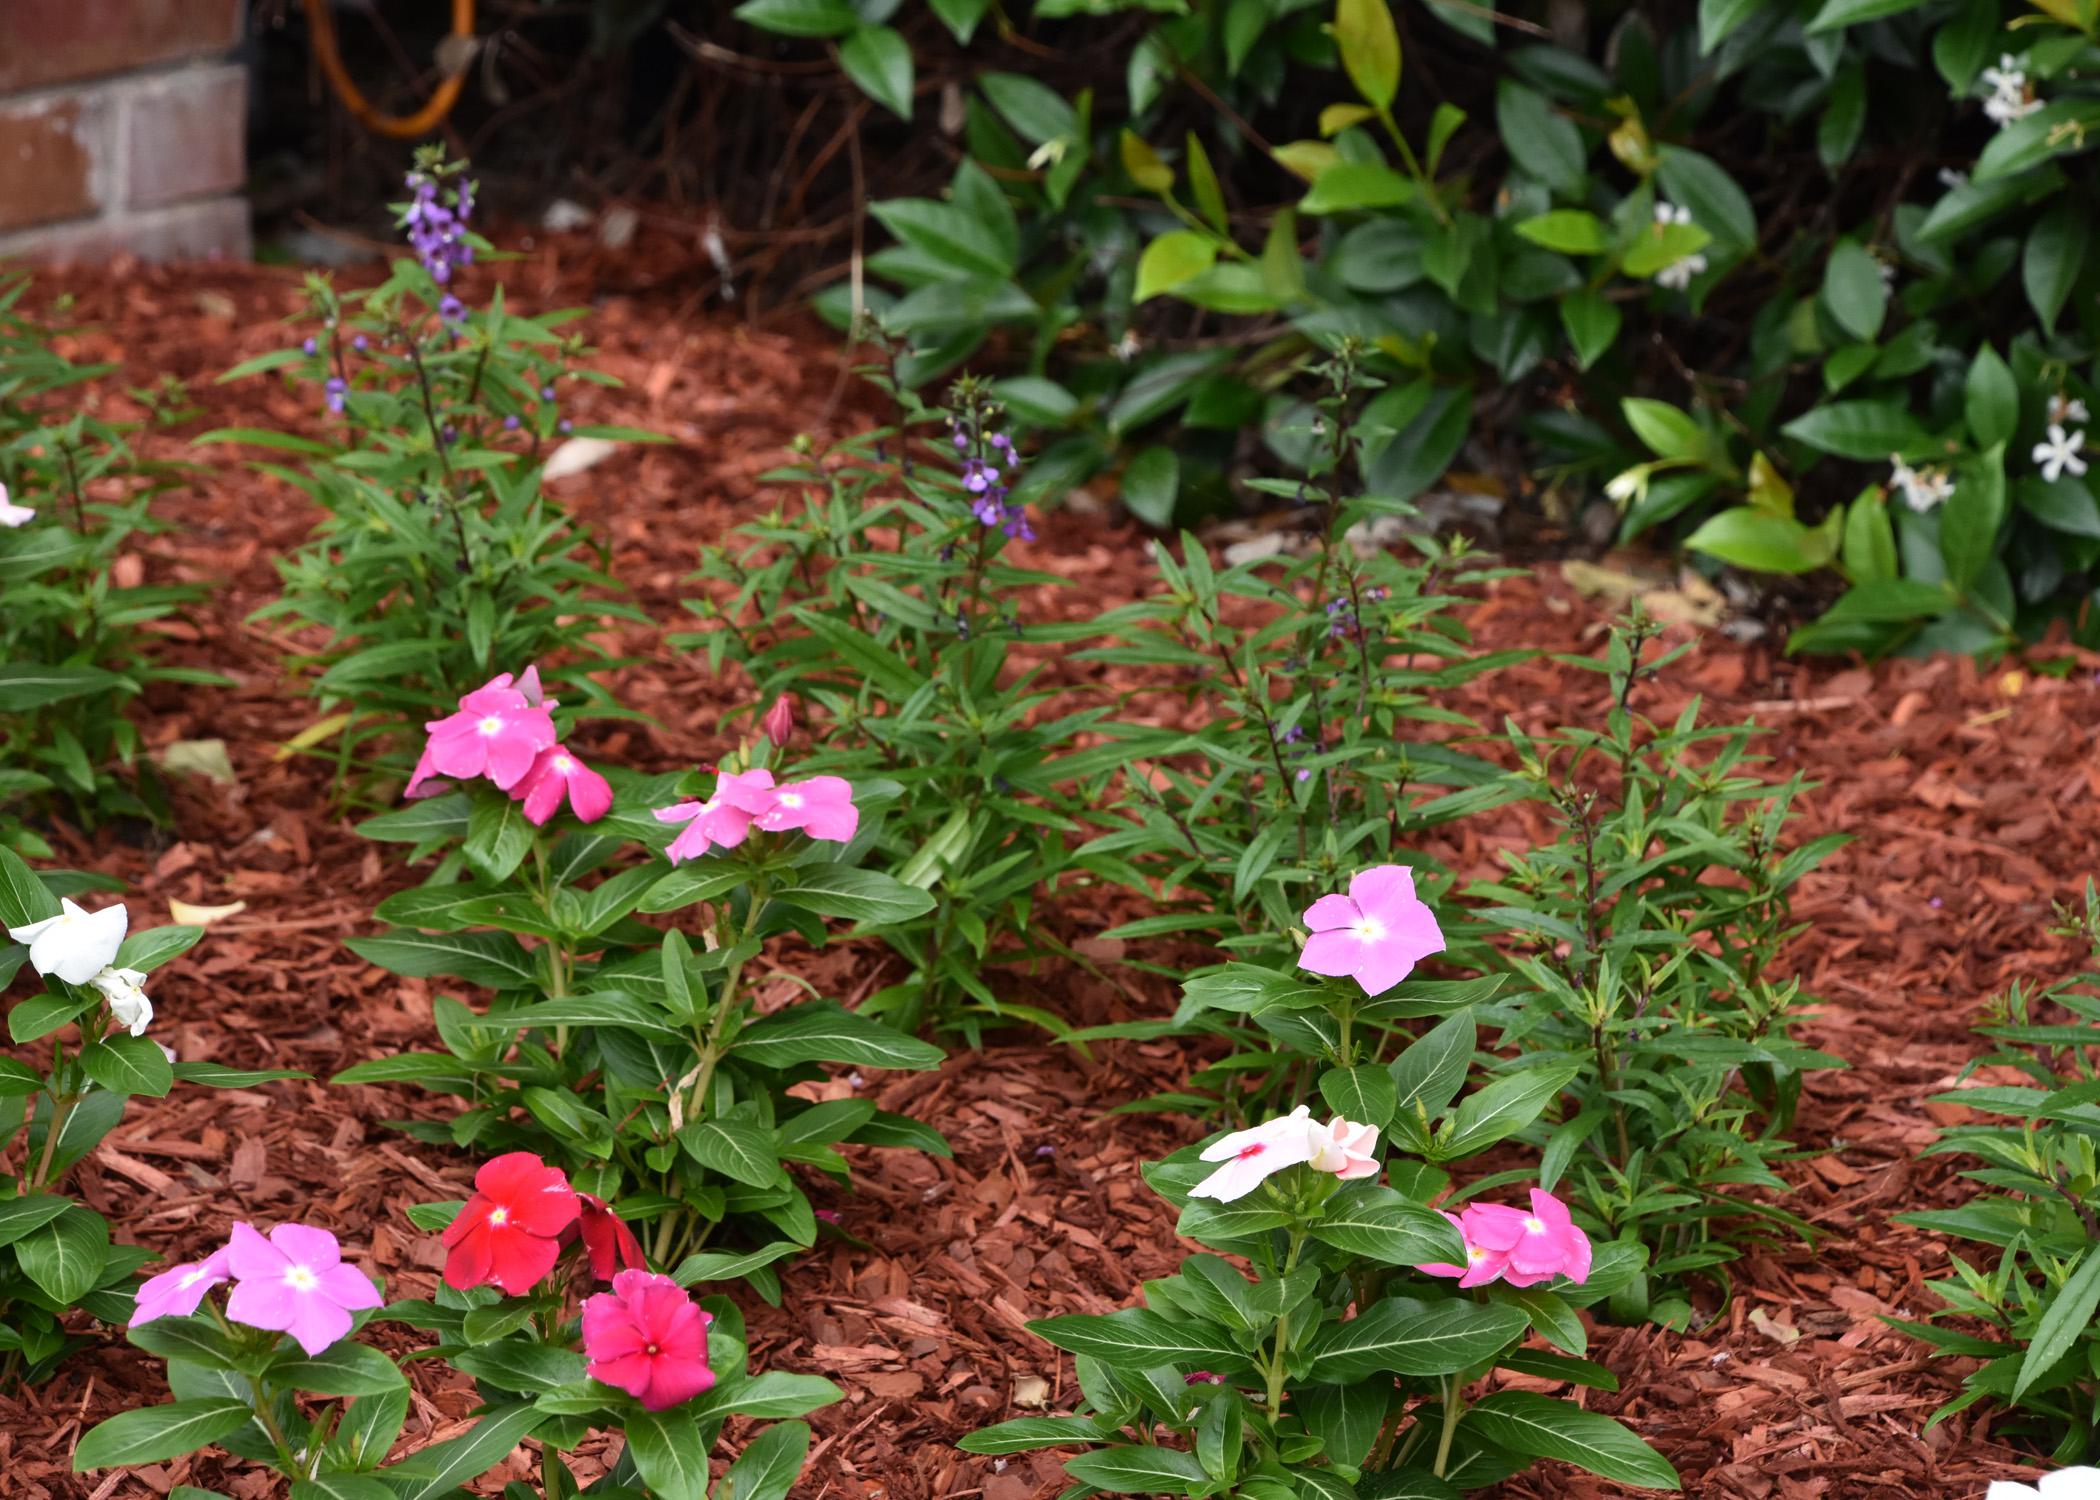 Mulch surrounds small flowering plants.